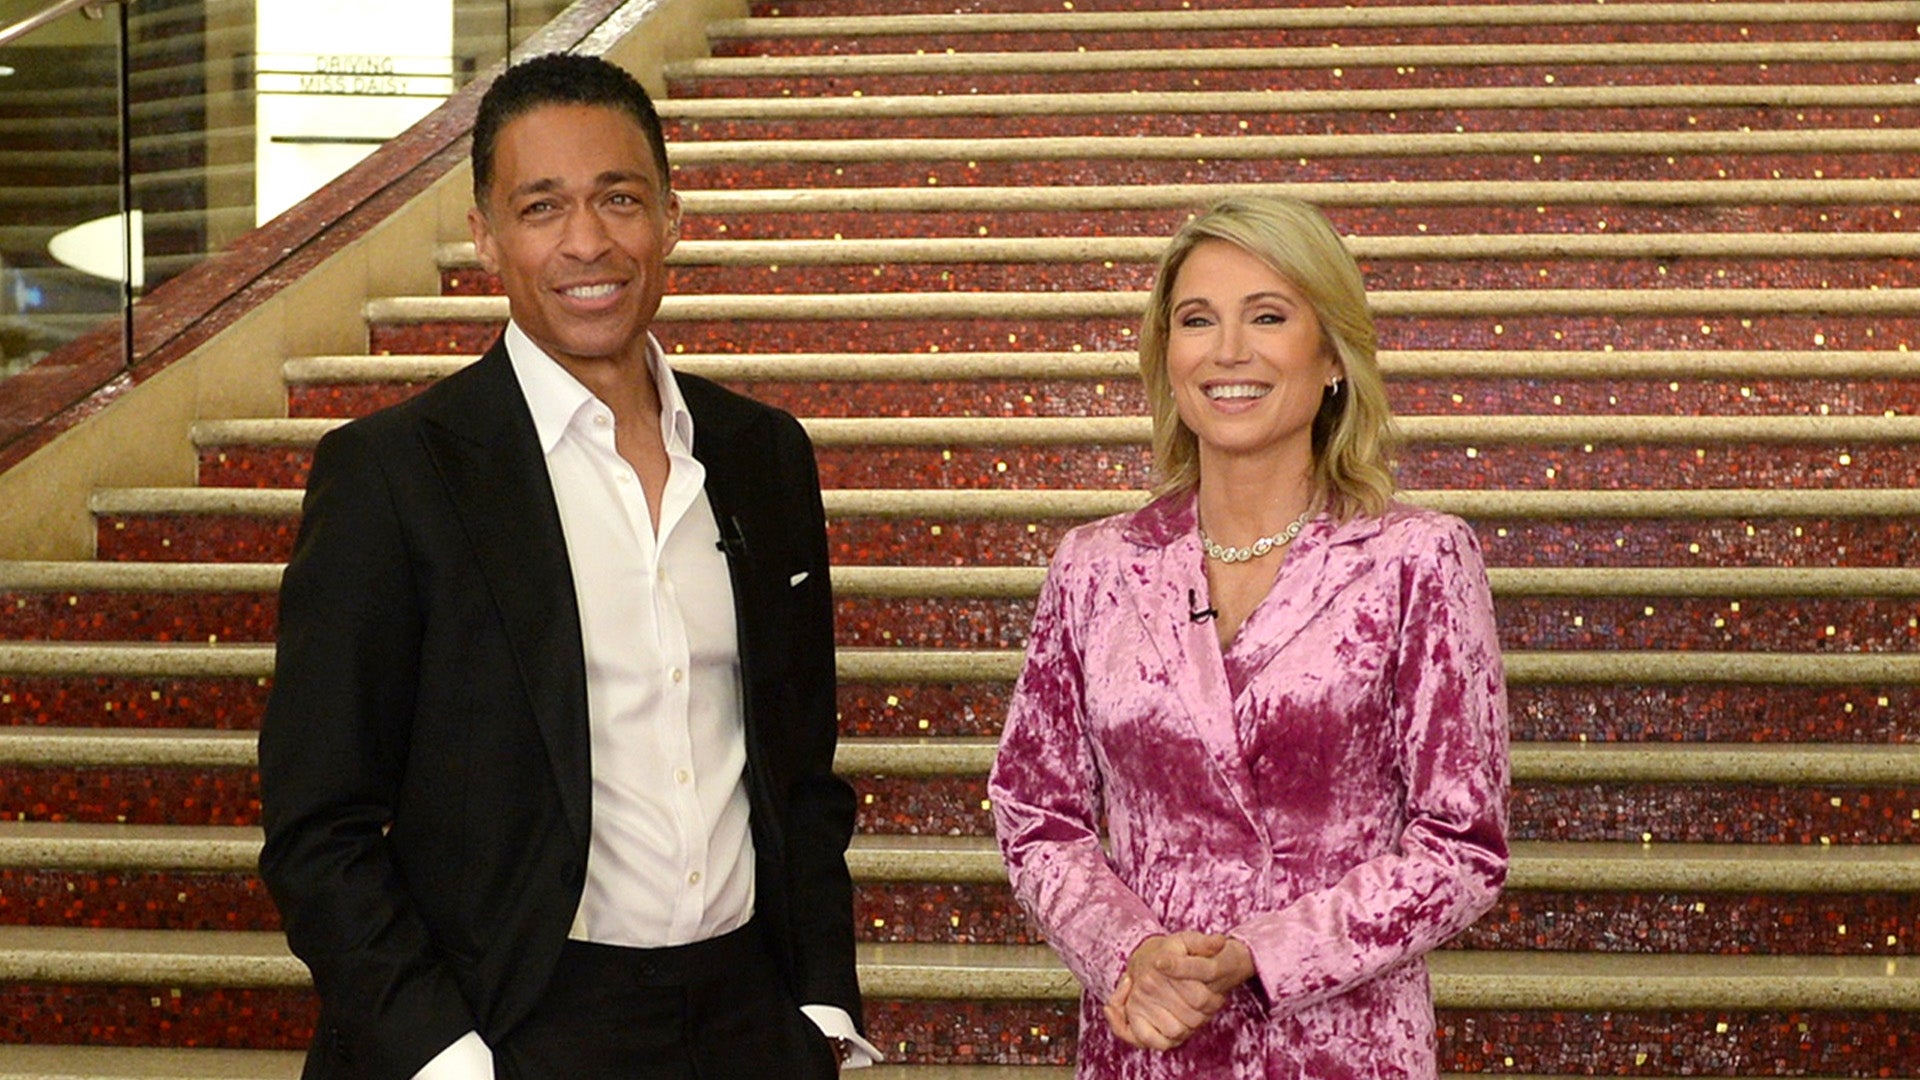 ABC Staffers Think Amy Robach and T.J.Holmes' Romance 'Taints the Brand' (Source)